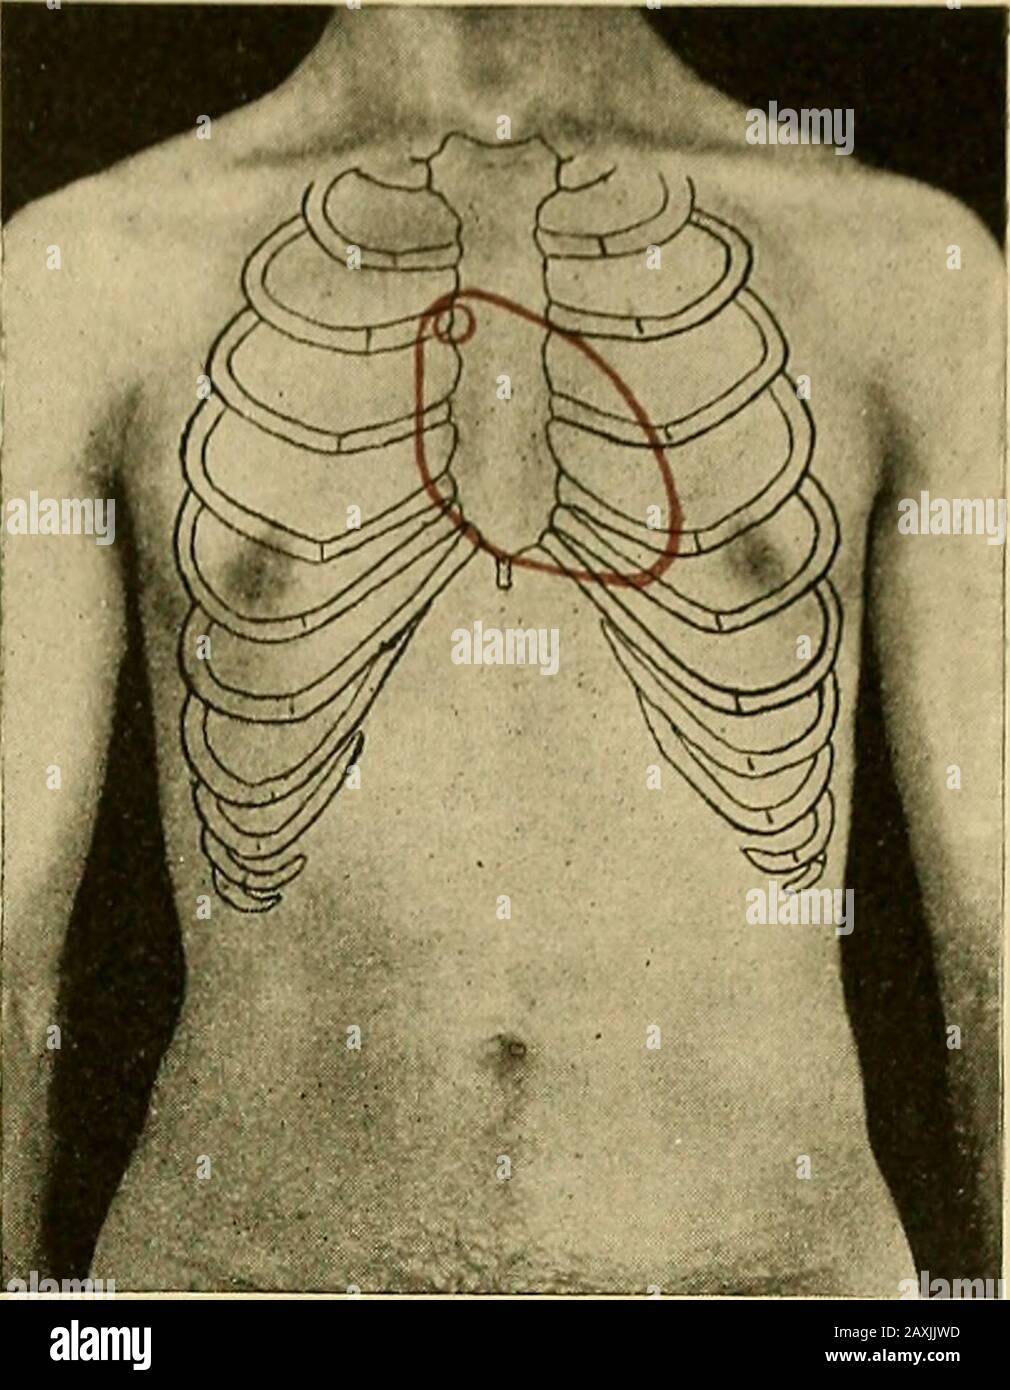 Diseases of the heart and arterial system : designed to be a practical presentation of the subject for the use of students and practitioners of medicine . AORTIC REGURGITATION .,:, only in the fourth left interspace, close to the breastbone. It: isgenerally most distinct in the erecl position or when the heartsaction is excited. Neverthe-less I have certainly observedcases in which the murmur be-came more distinct and easilyrecognised when the patientwas recumbent. This murmuris transmitted downward to-wards the ensiform appendix,and in some instances alsotowards the left, even as faras the ap Stock Photo